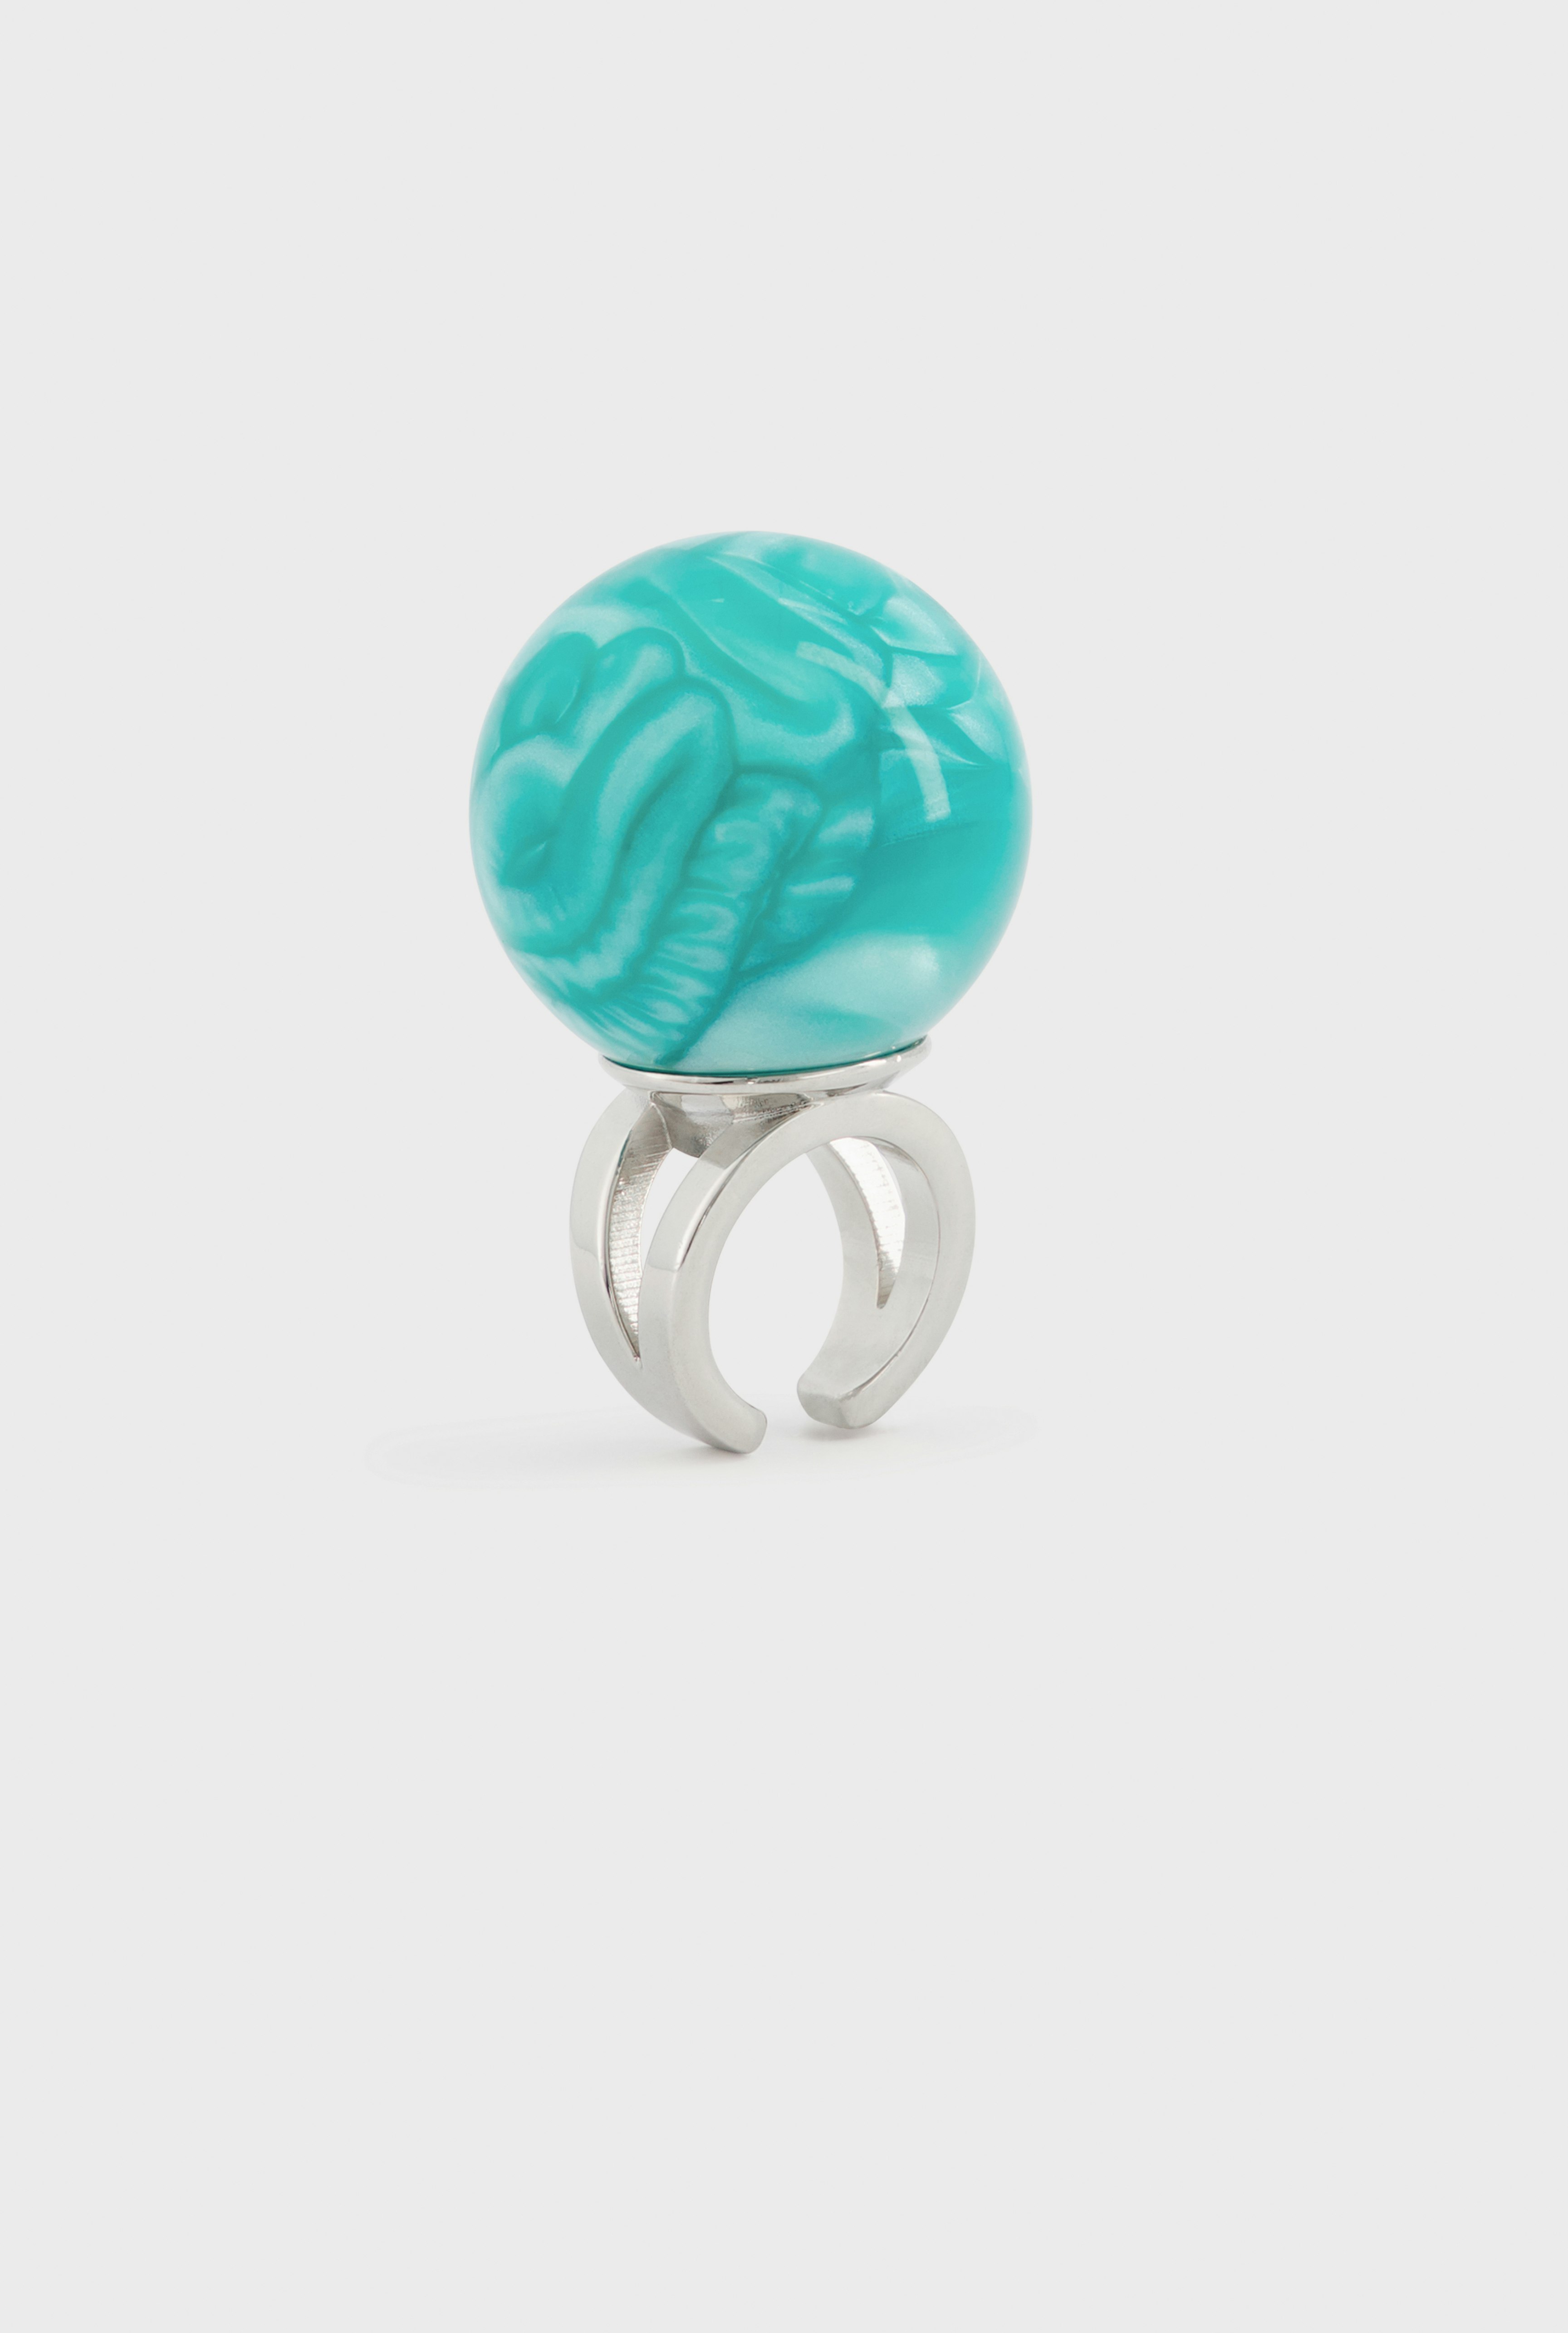 The Turquoise Cyber Ball Ring Jean Paul Gaultier